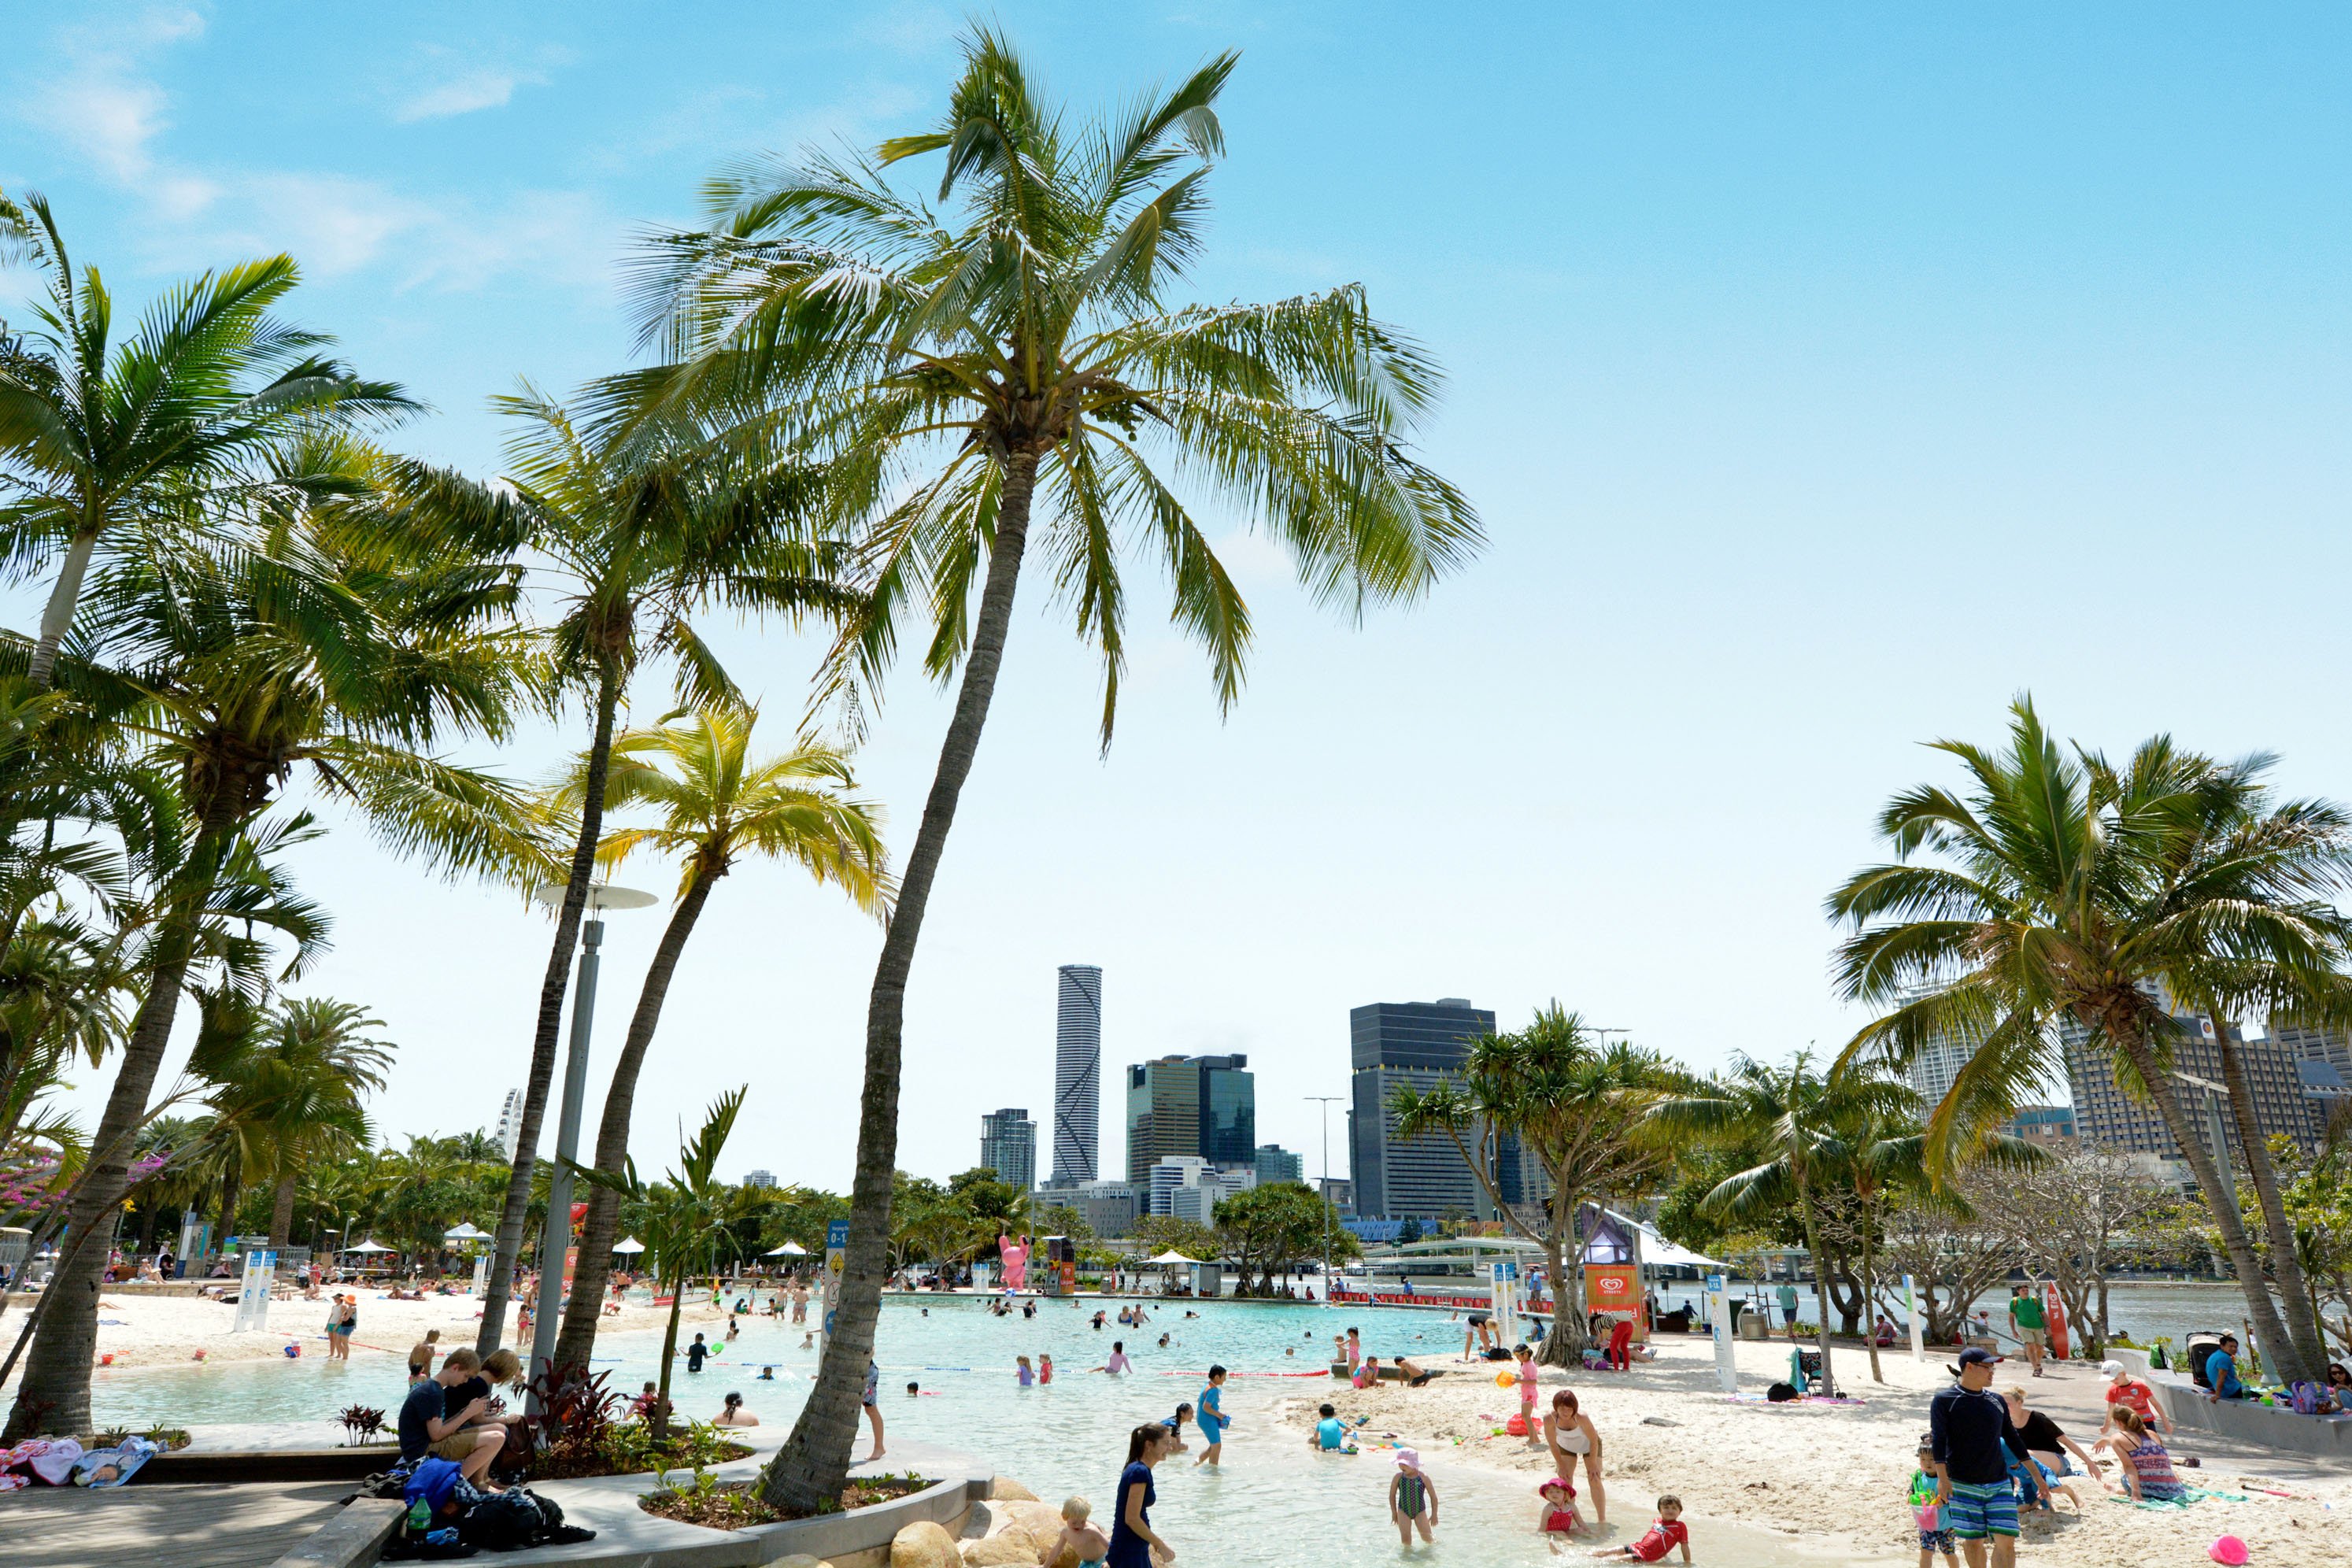 Australia's only beach in the middle of the city, Streets Beach is one of South Bank's most popular attractions